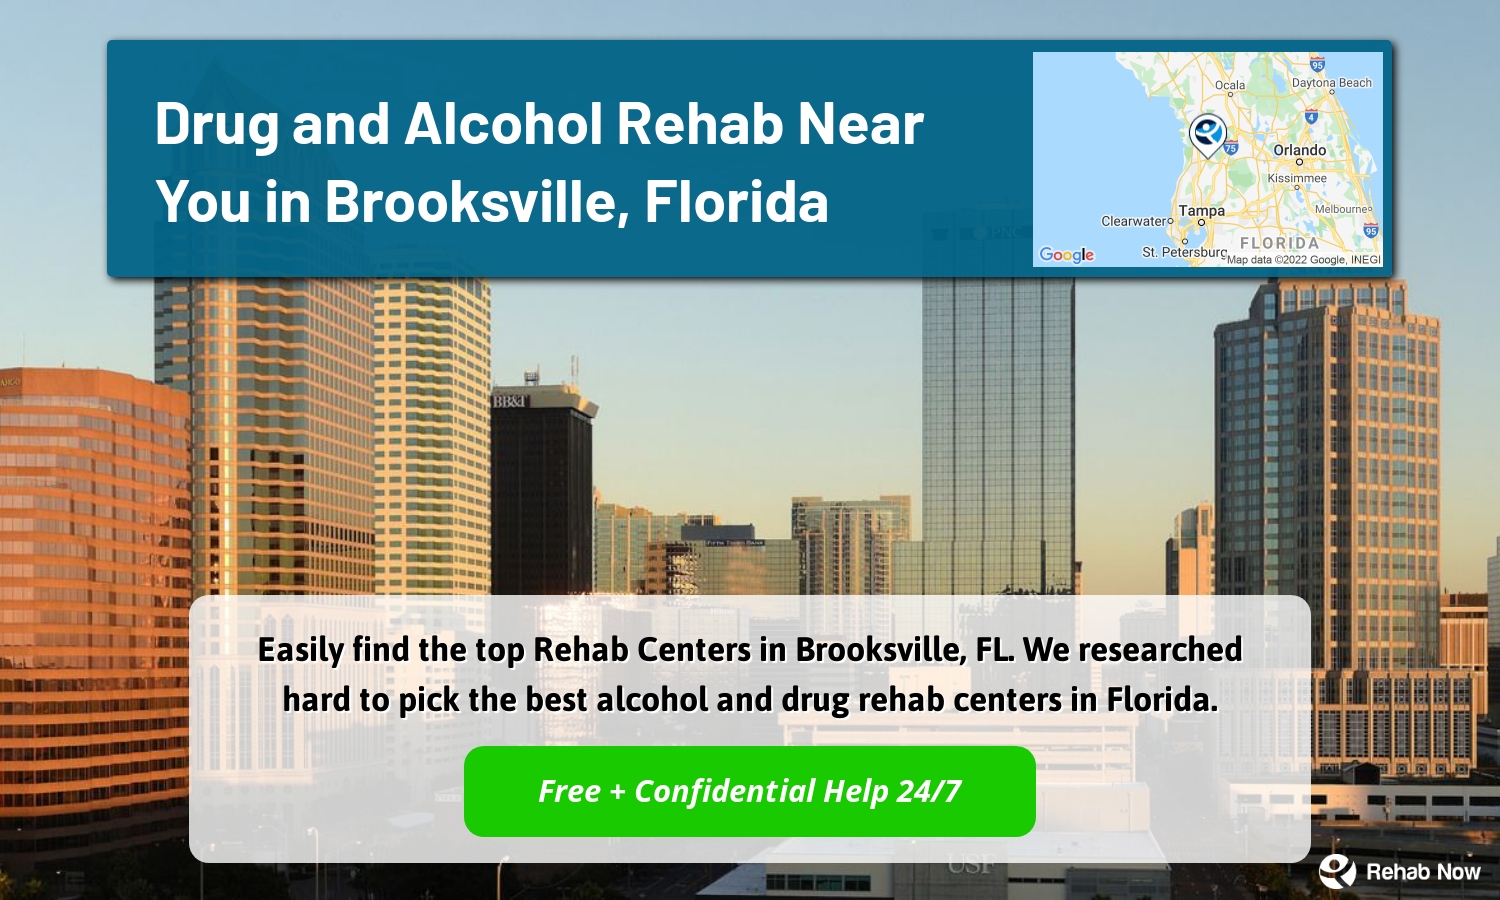 Easily find the top Rehab Centers in Brooksville, FL. We researched hard to pick the best alcohol and drug rehab centers in Florida.